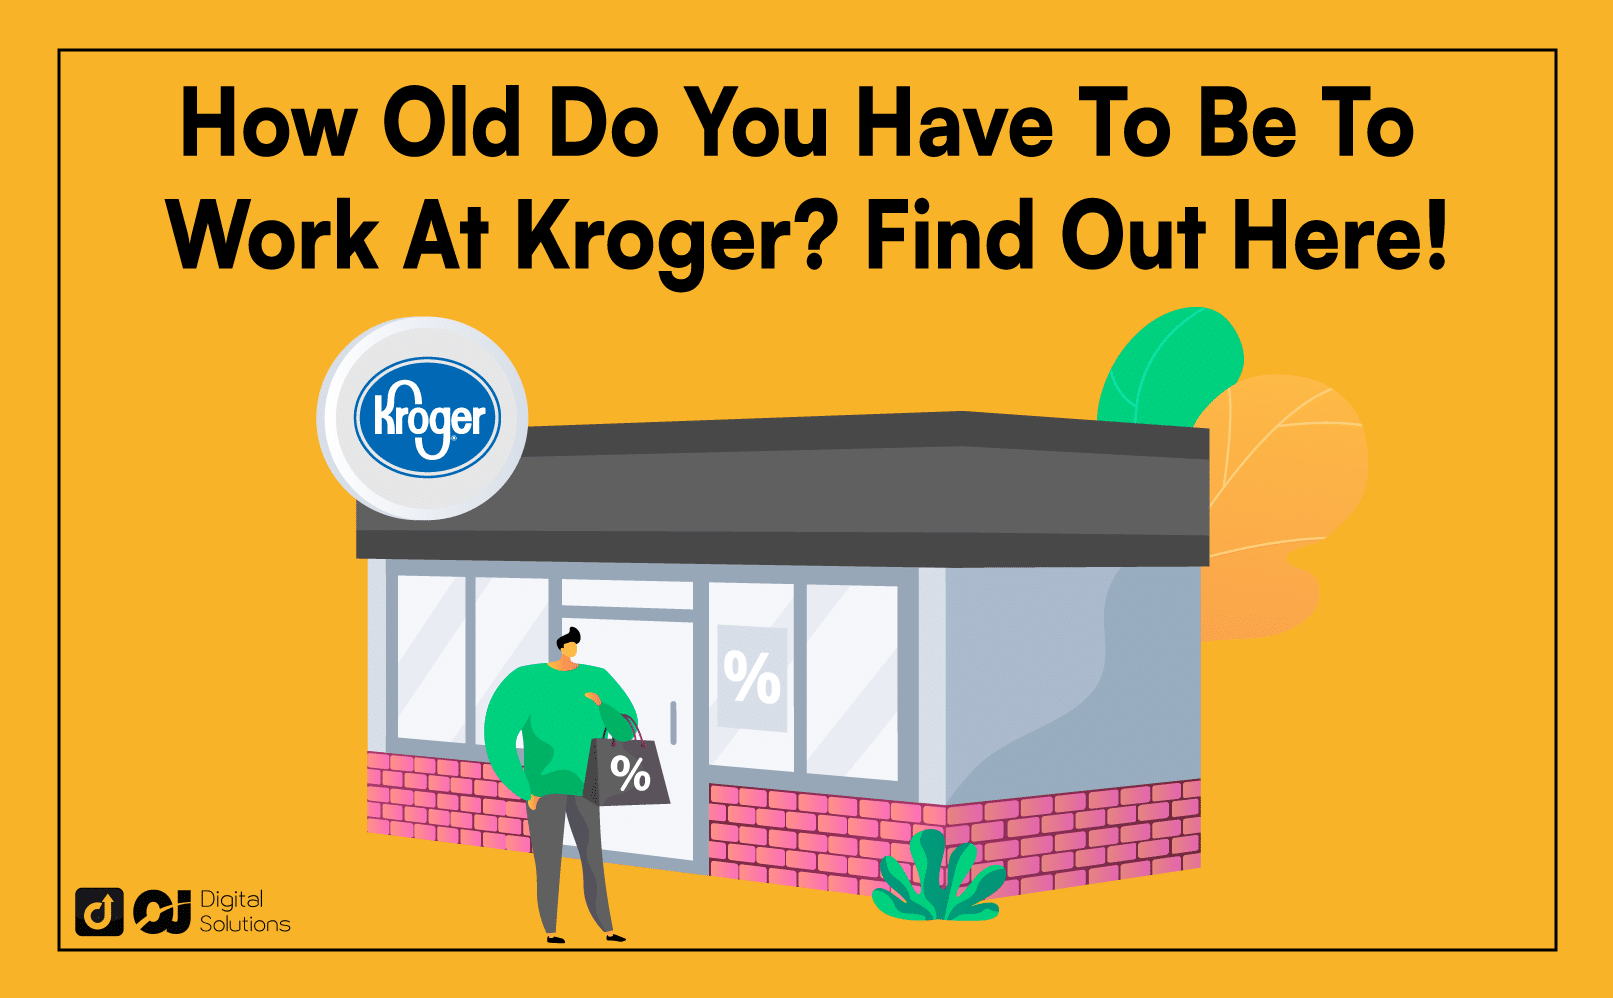 How Old Do You Have To Be To Work At Kroger